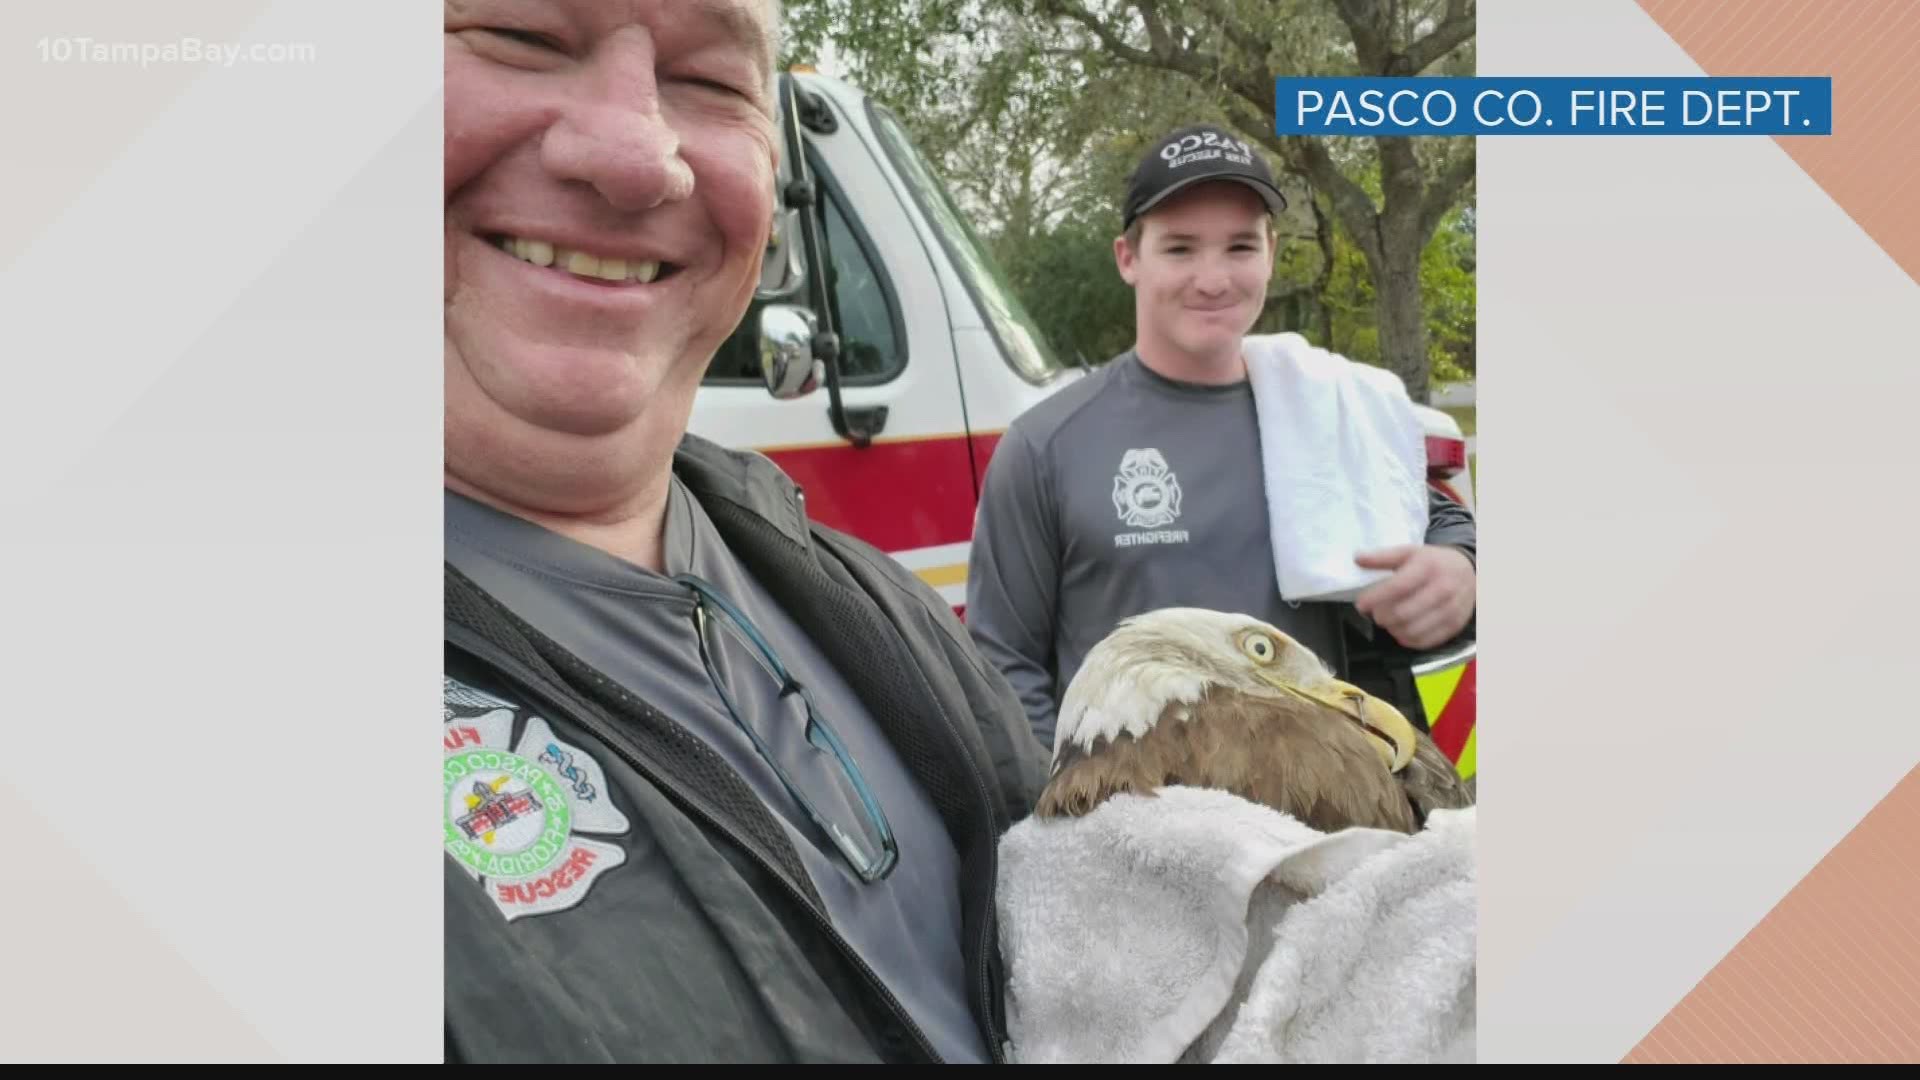 A bald eagle in distress is now recovering after the Pasco Fire Rescue, some good Samaritans, and the Owl’s Nest Sanctuary stepped in to help.